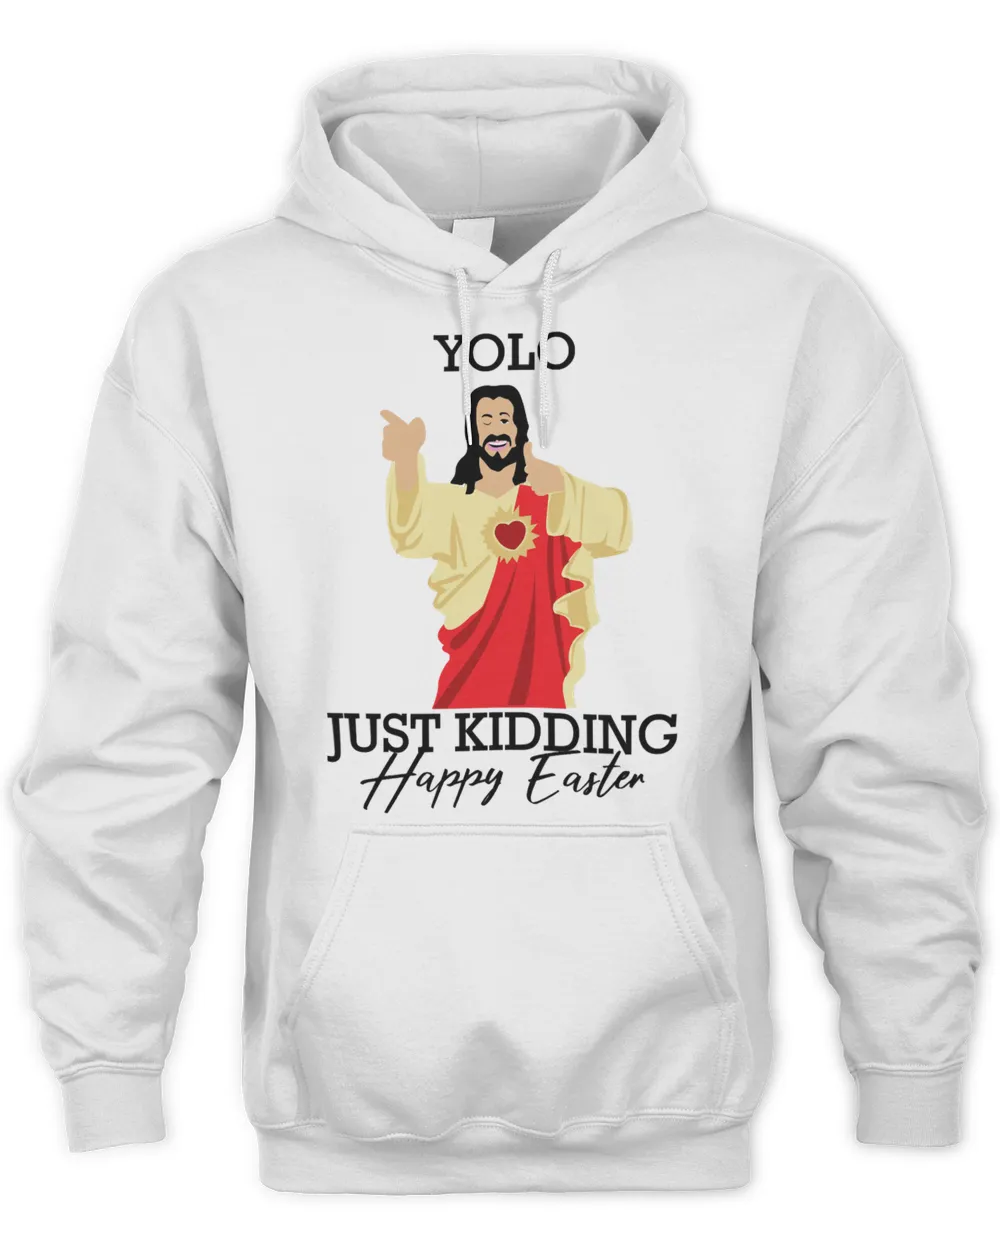 Yolo Just Kidding Happy Easter Funny Jesus Shirt Essential T-Shirt